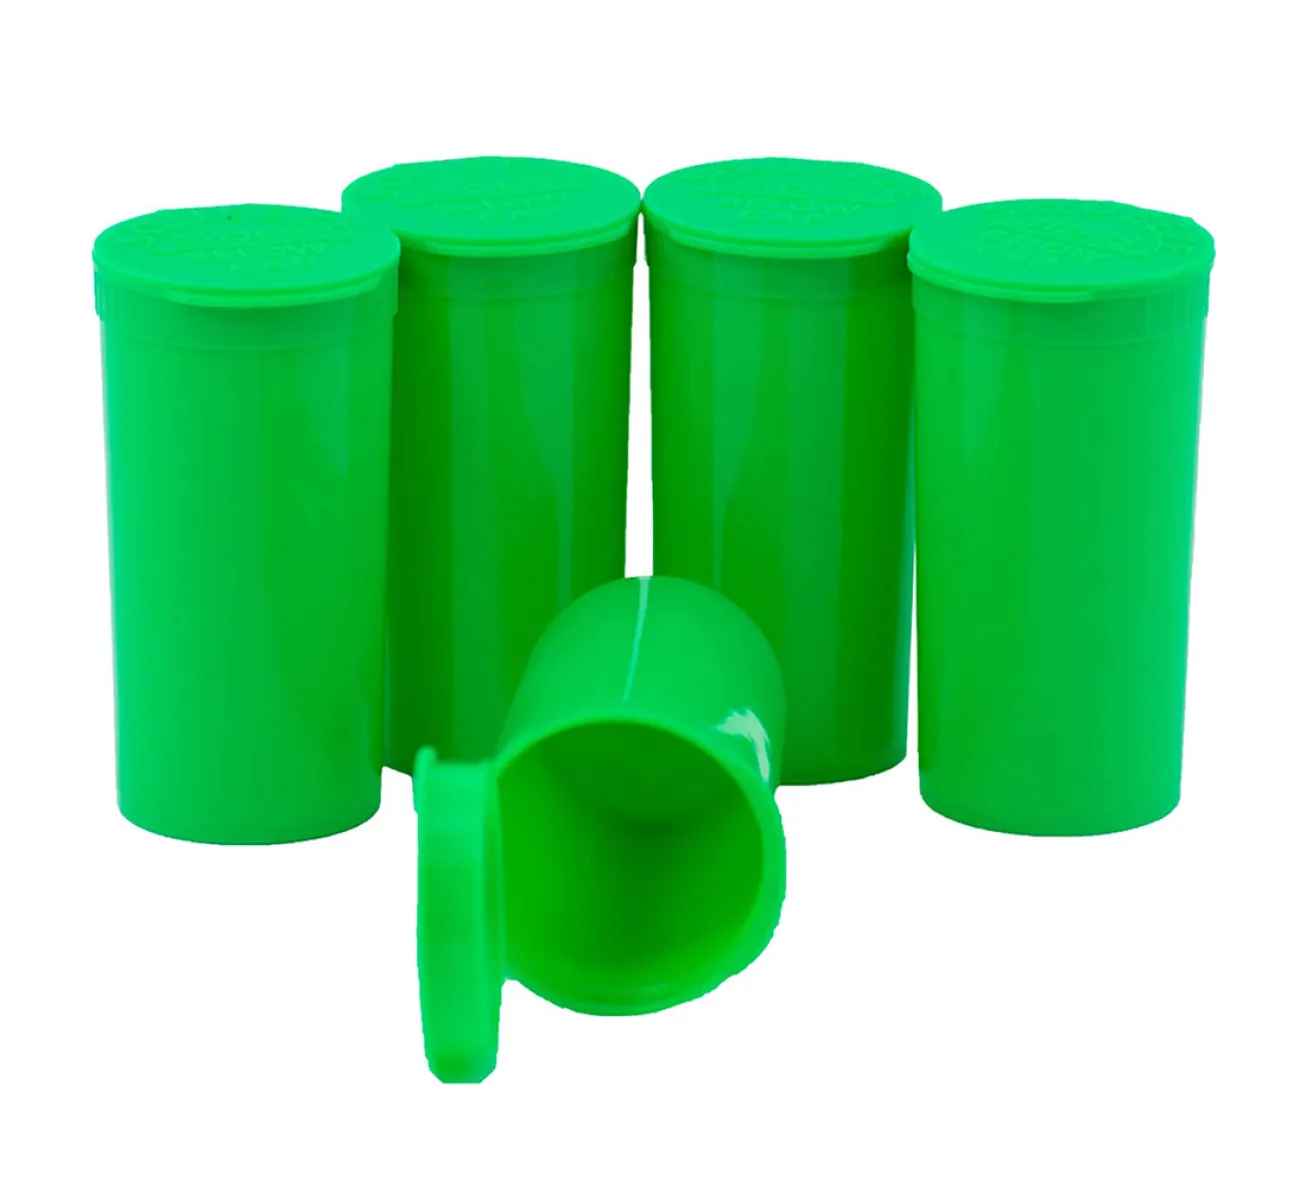 https://888lots.com/images/products/emerald-mountain-supplier-pop-top-dram-containersdurable-888-b08b2lmky3.webp